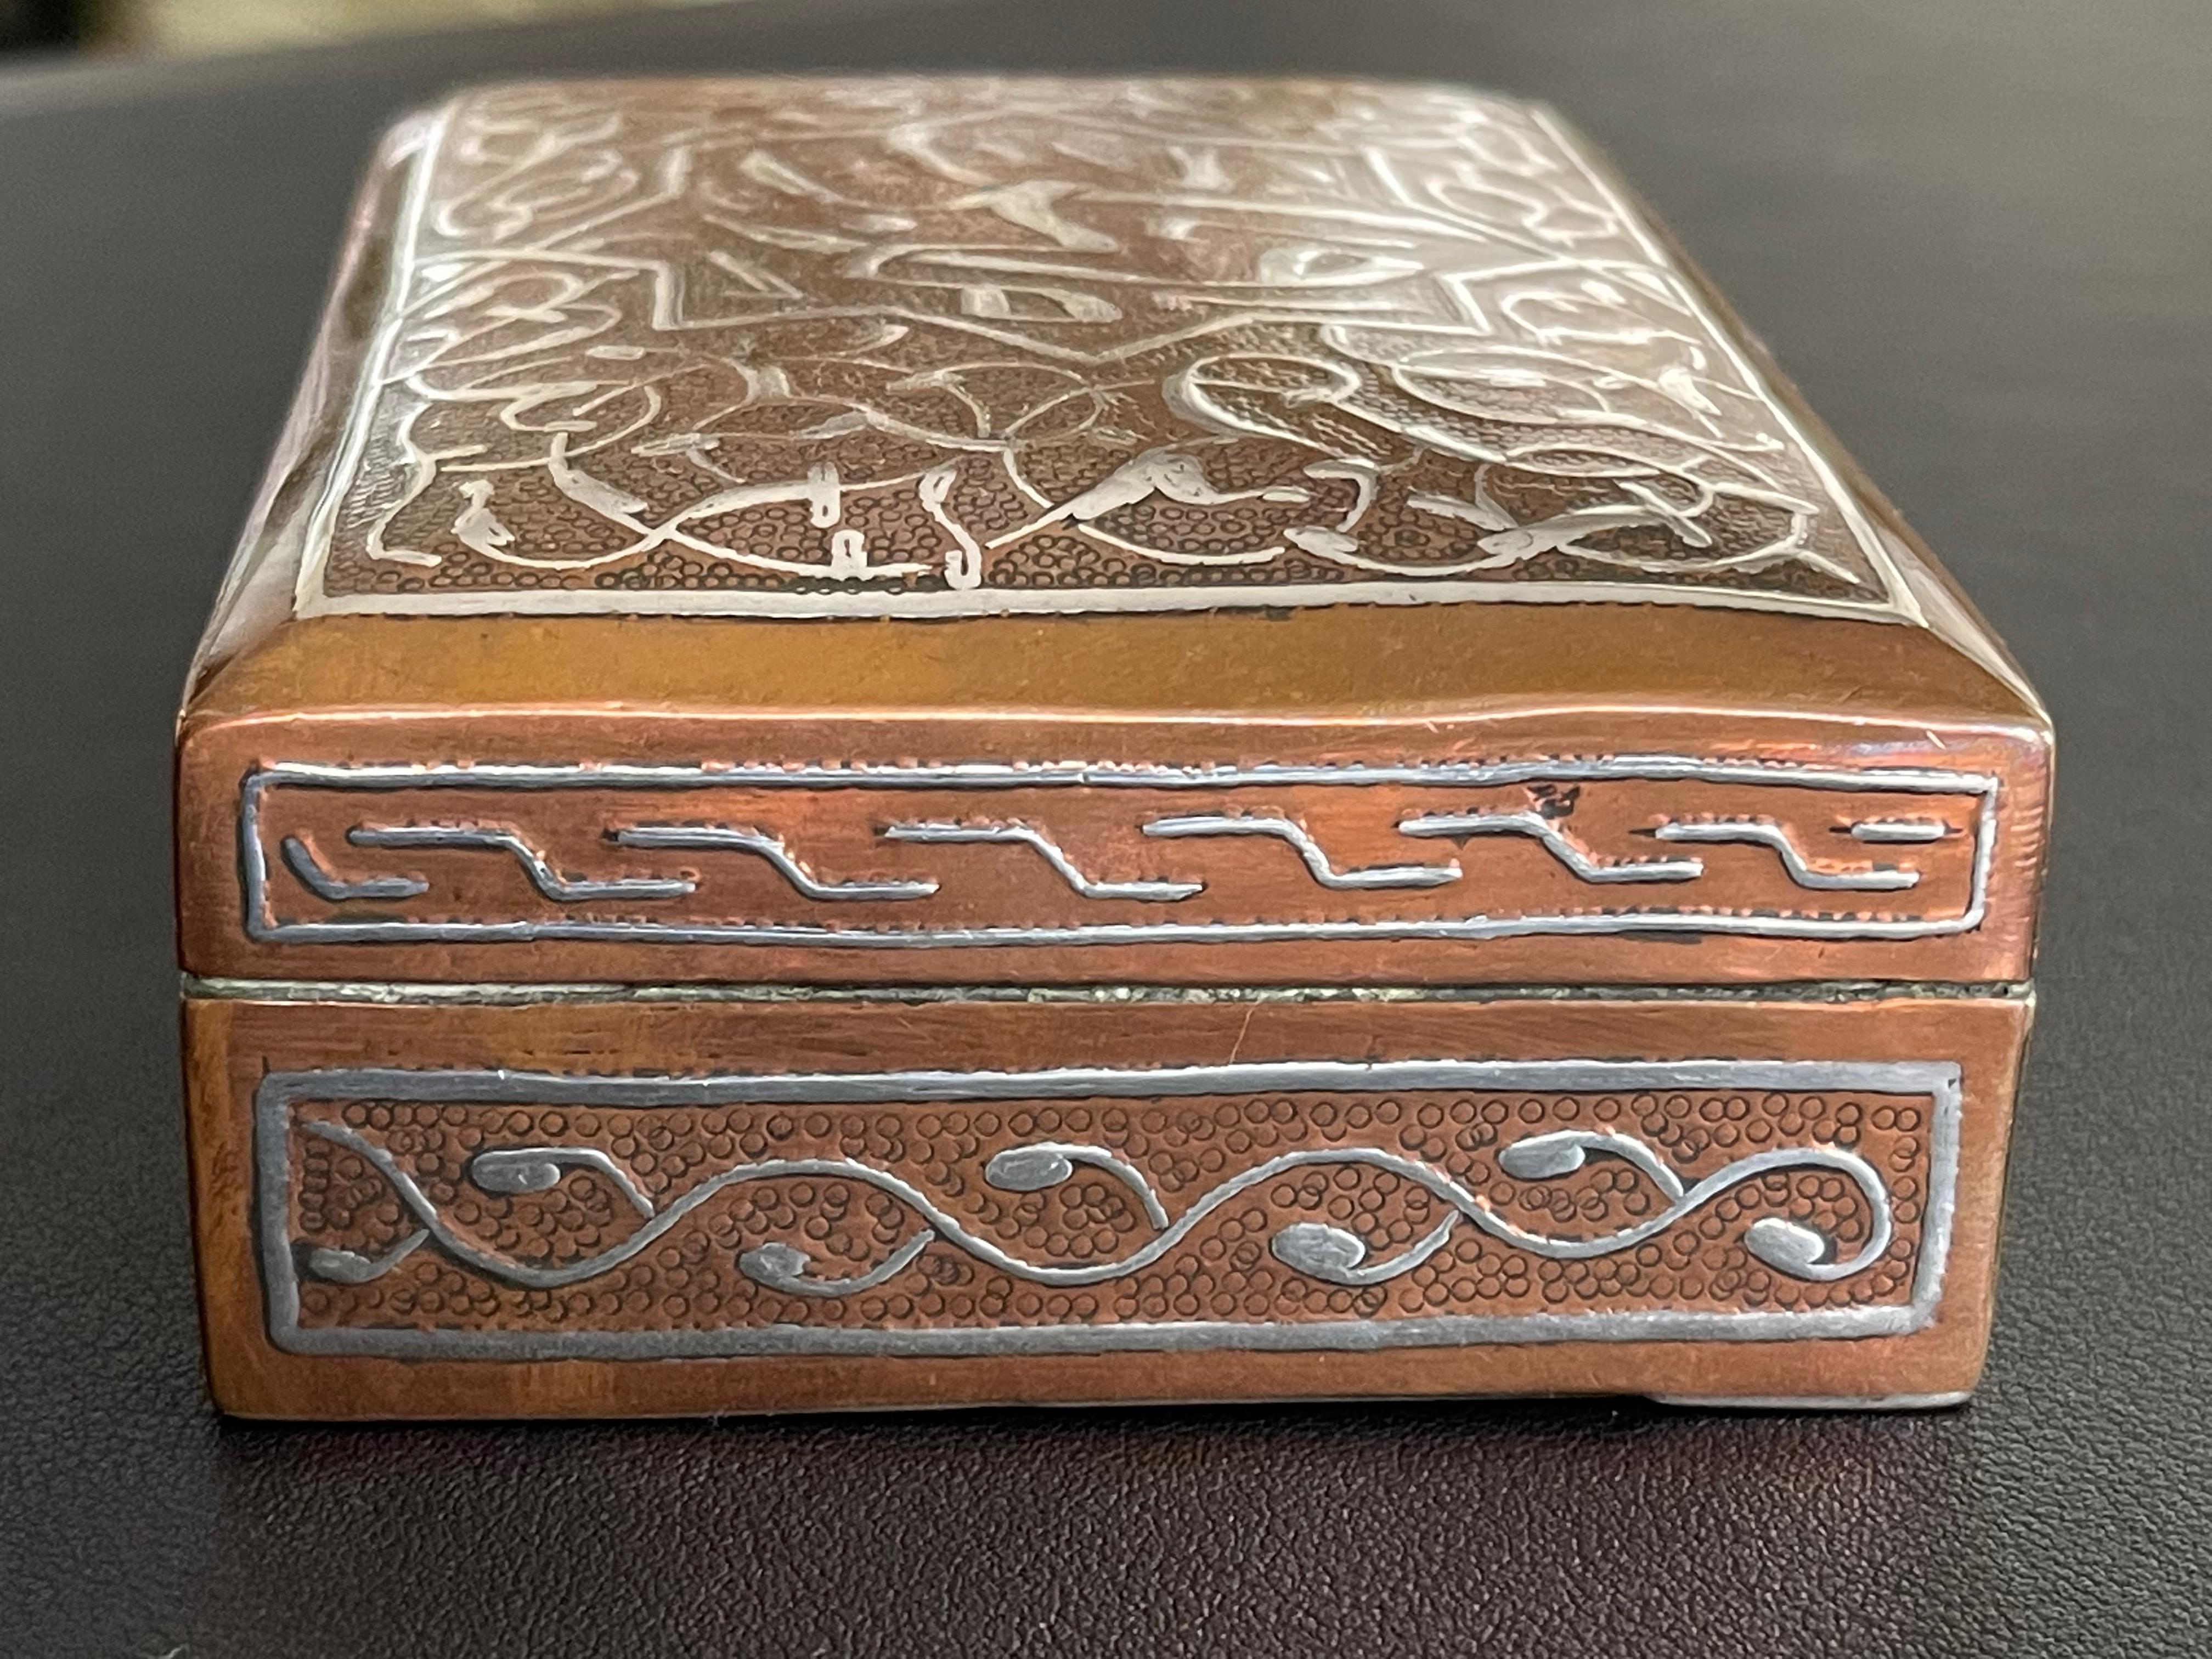 20th Century Antique Islamic Silver Calligraphy Damascened Copper Jewelry Box For Sale